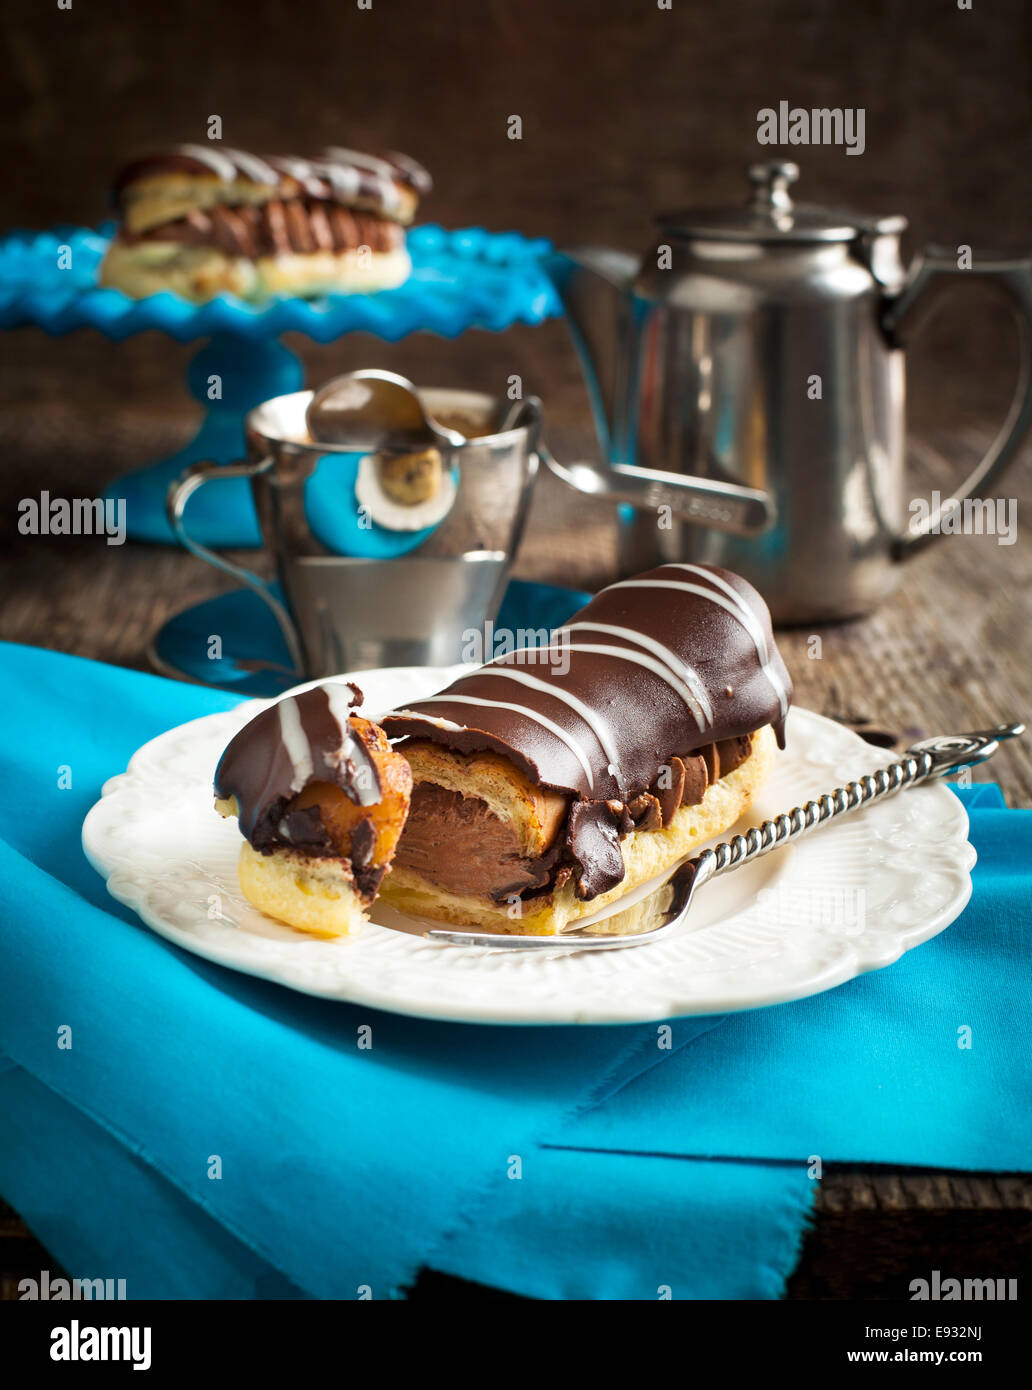 Chocolate eclairs and cup of espresso Stock Photo